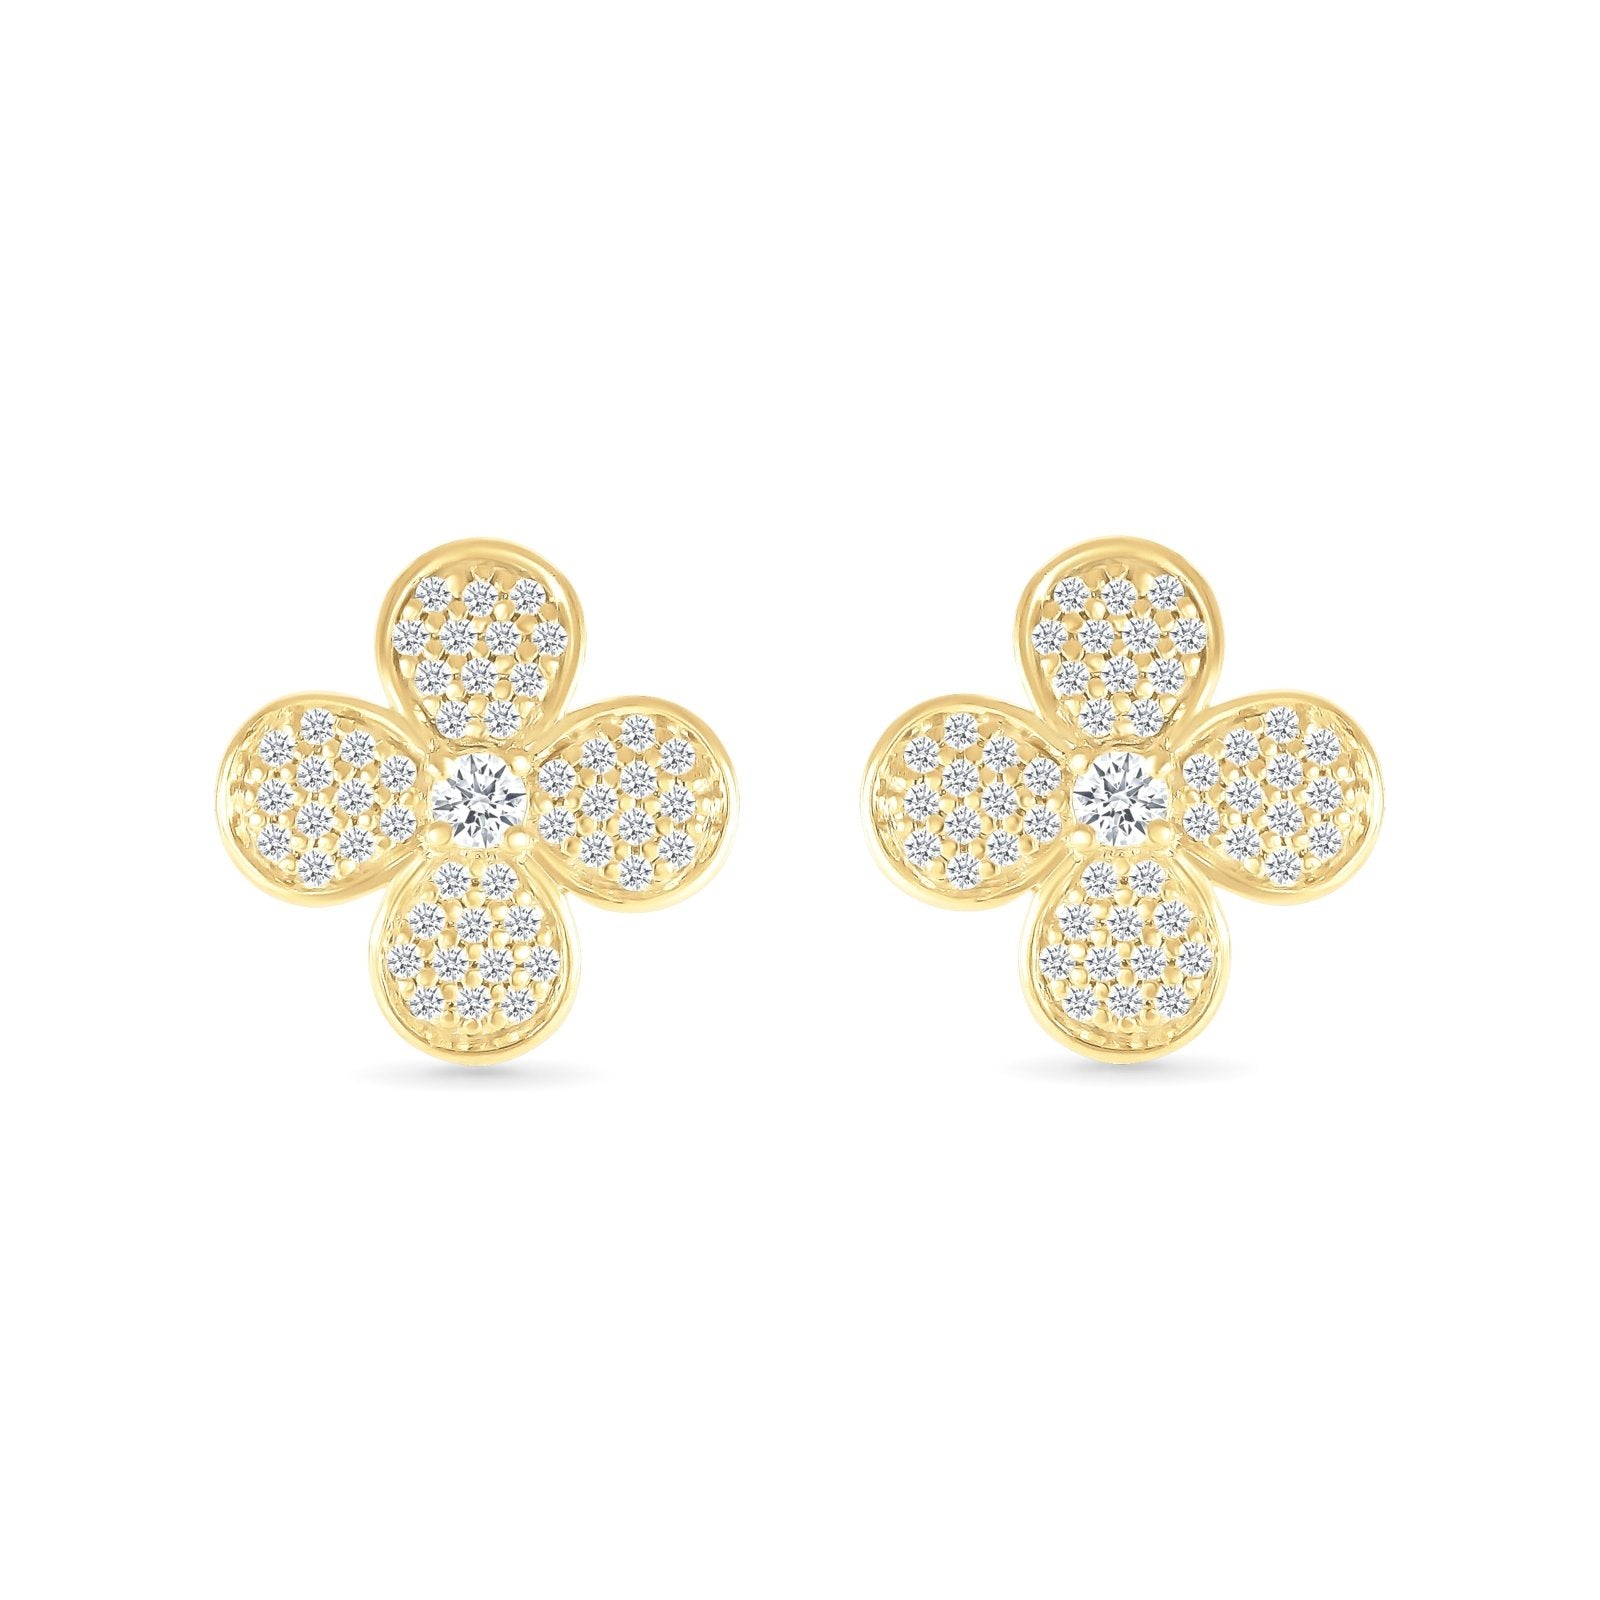 Four Petal Flower Diamond Pave Stud Earrings Earrings Estella Collection #product_description# 32667 10k April Birthstone Colorless Gemstone #tag4# #tag5# #tag6# #tag7# #tag8# #tag9# #tag10#